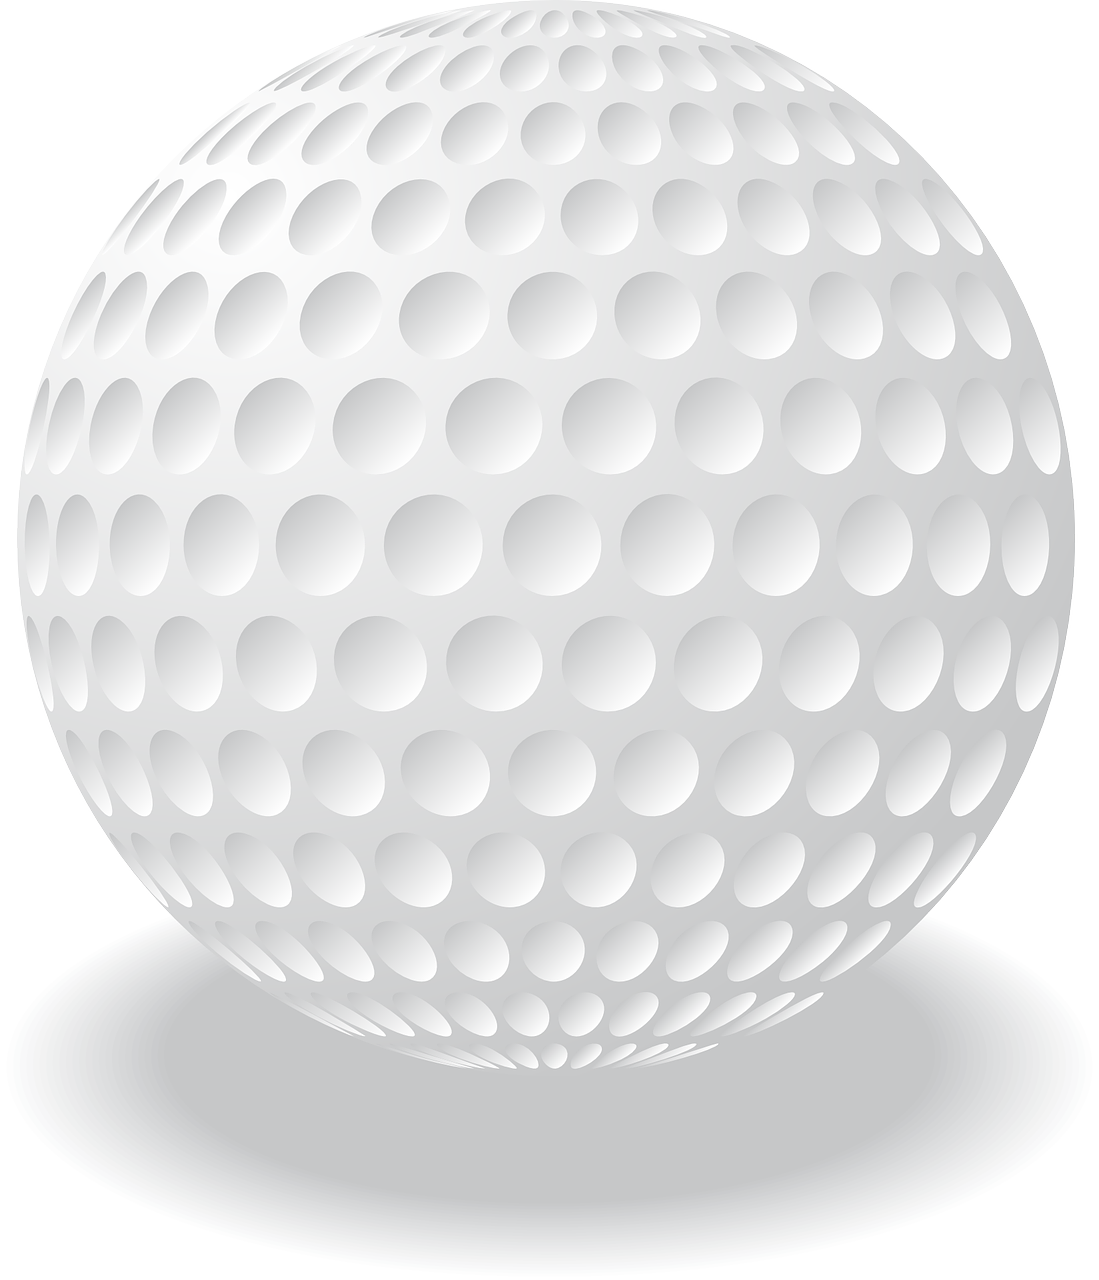 Why do Golf Balls Have Dimples?